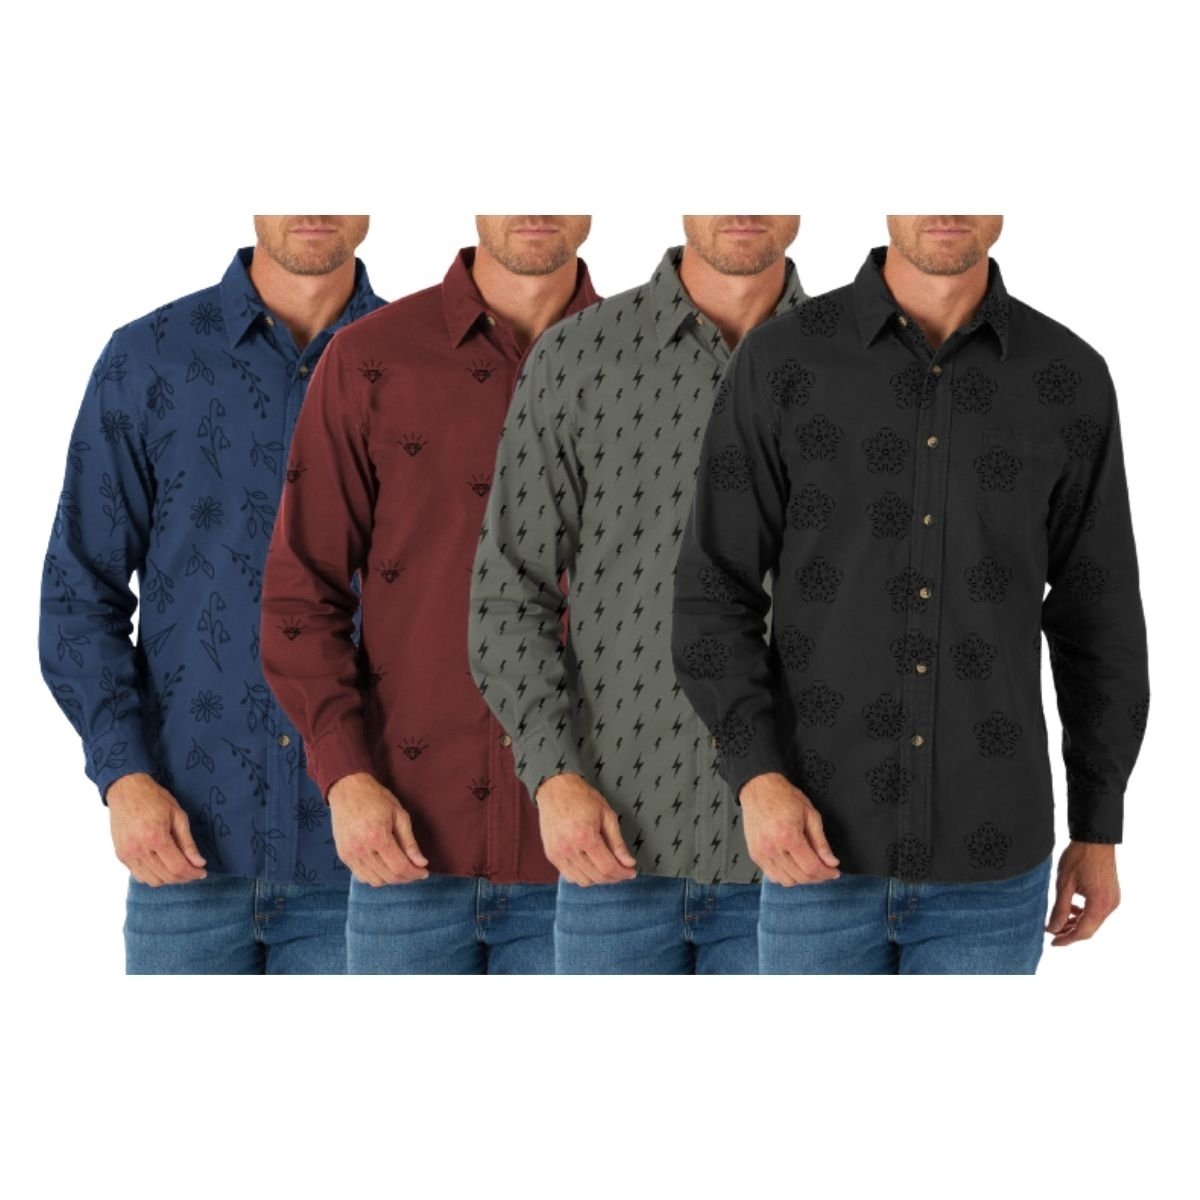 4-Pack: Men's Formal Classic Slim Fit Button Down Long Sleeve Printed Dress Shirt - Small